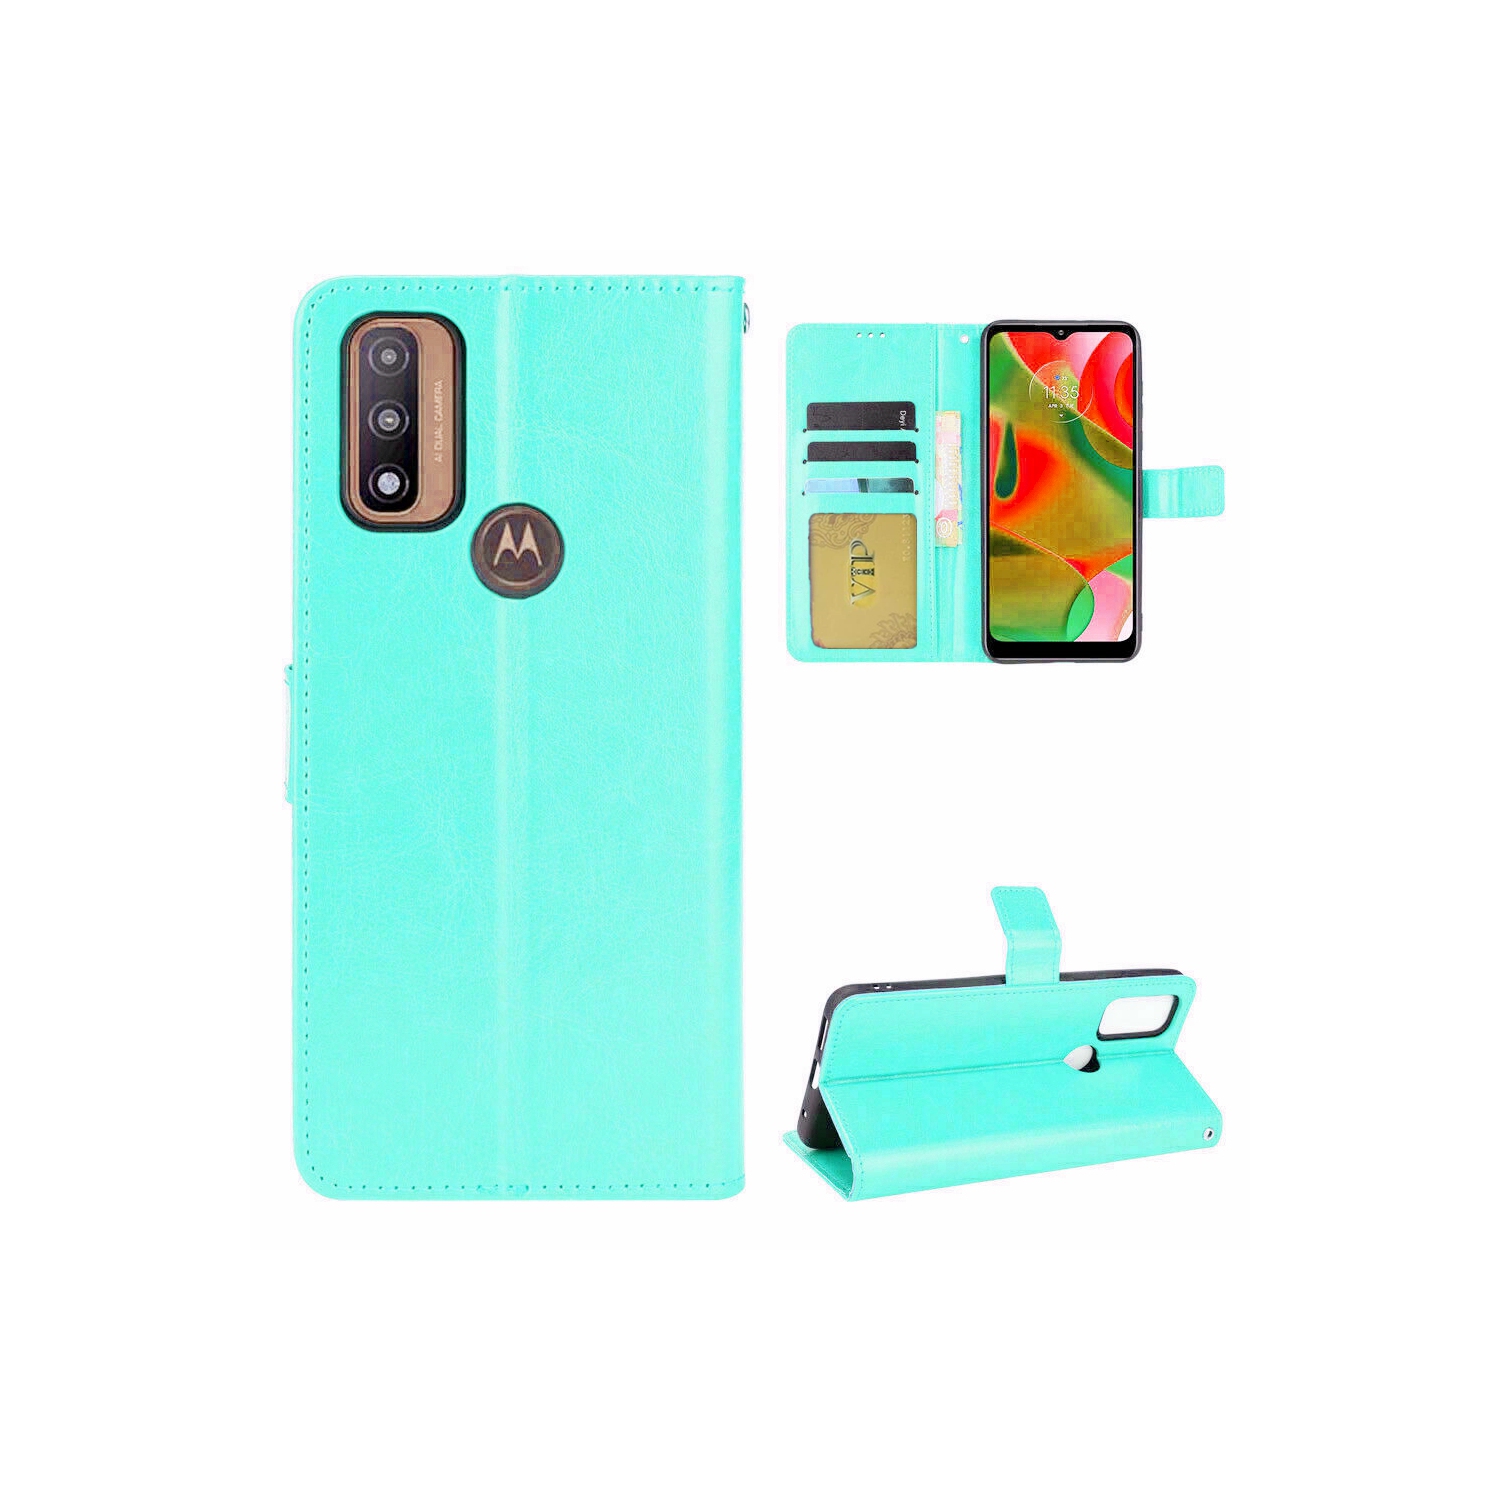 [CS] Motorola Moto G Pure 2021 Case, Magnetic Leather Folio Wallet Flip Case Cover with Card Slot, Teal